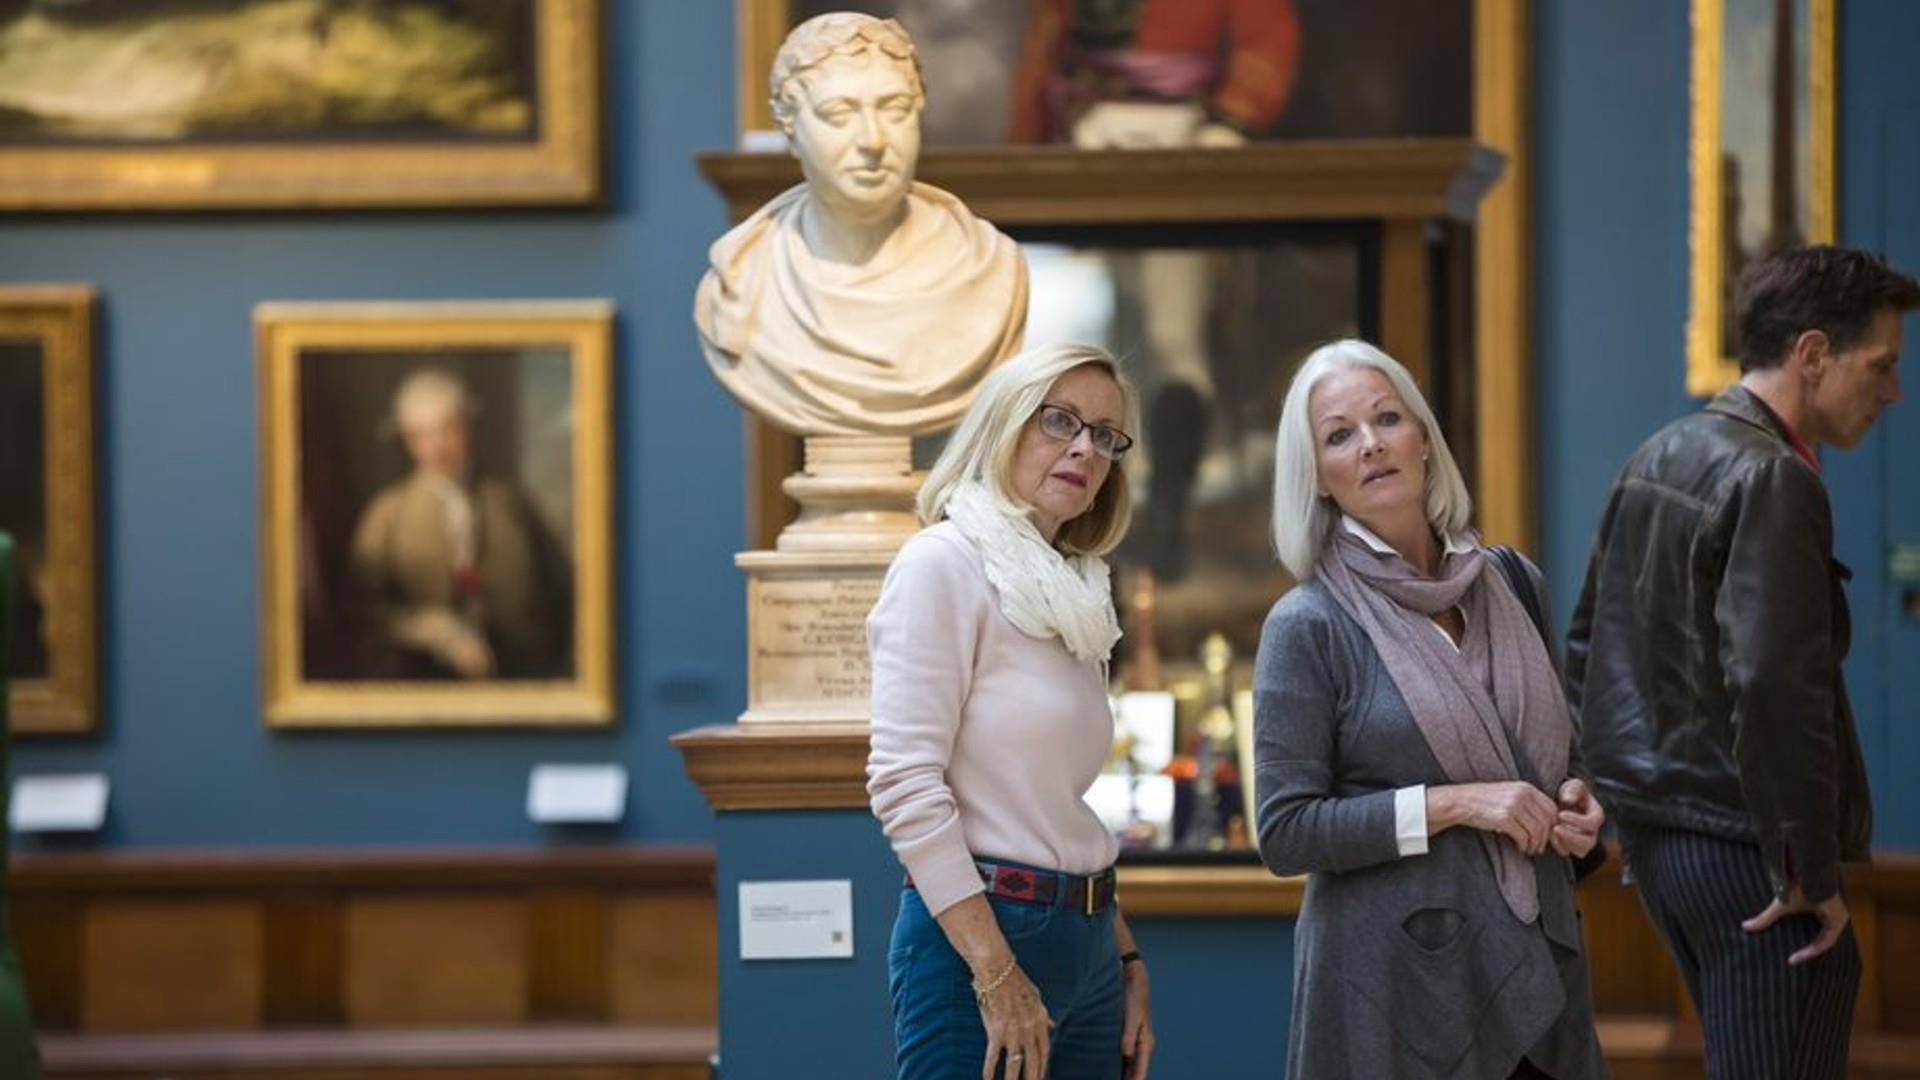 Visitors browse the exhibits at Victoria Art Gallery